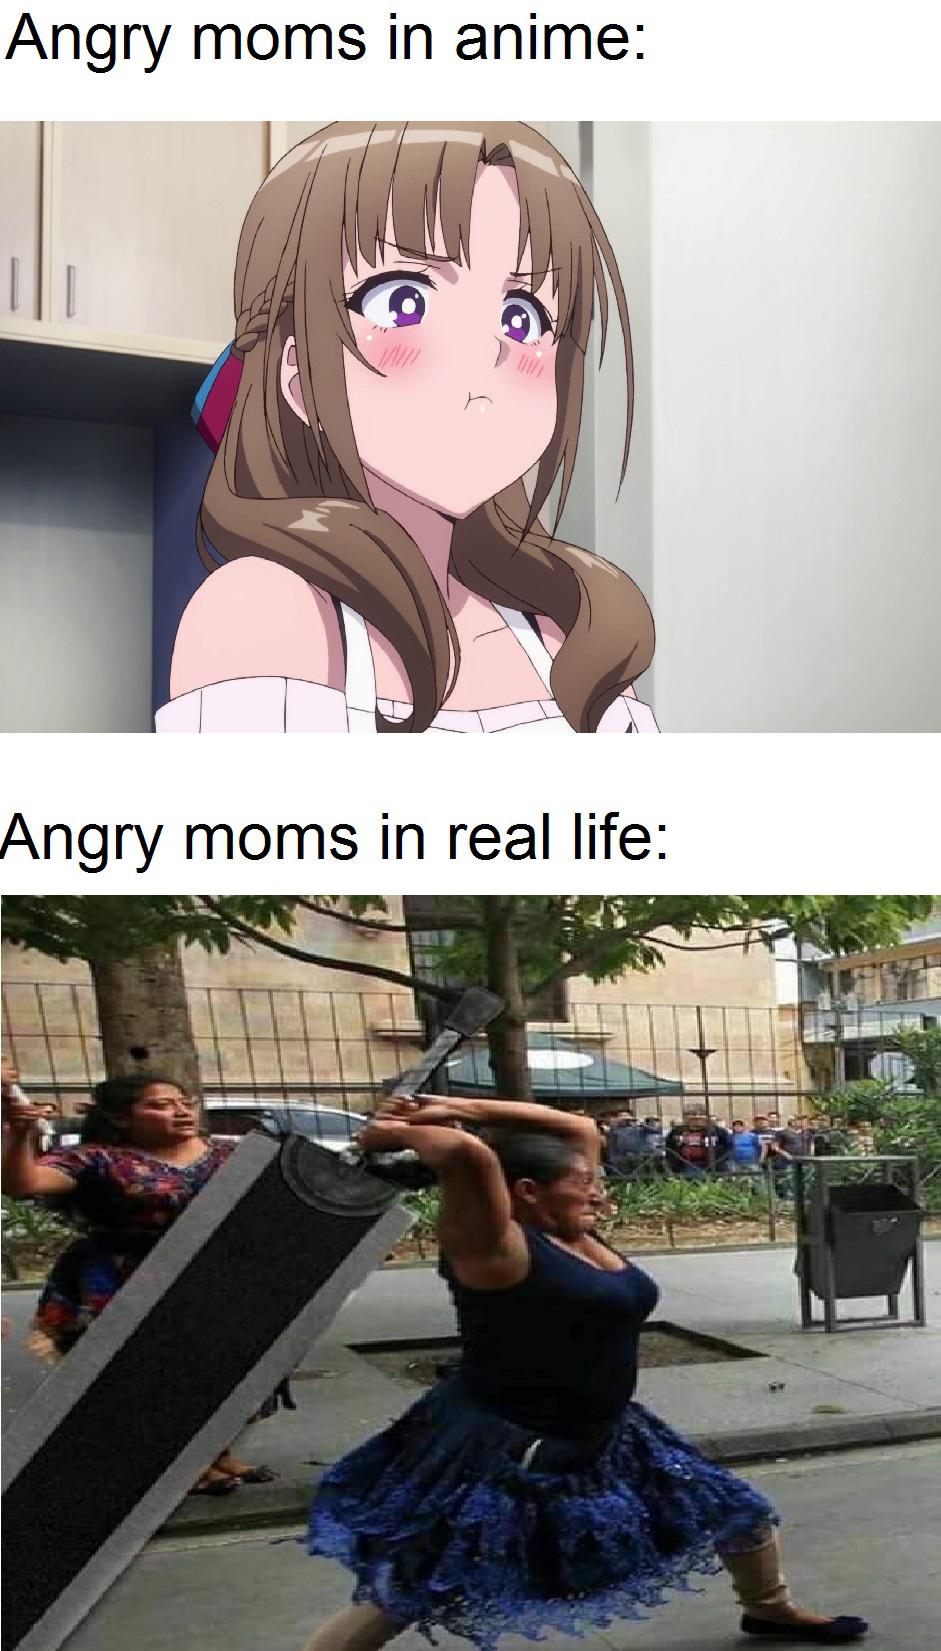 mom angry are an you